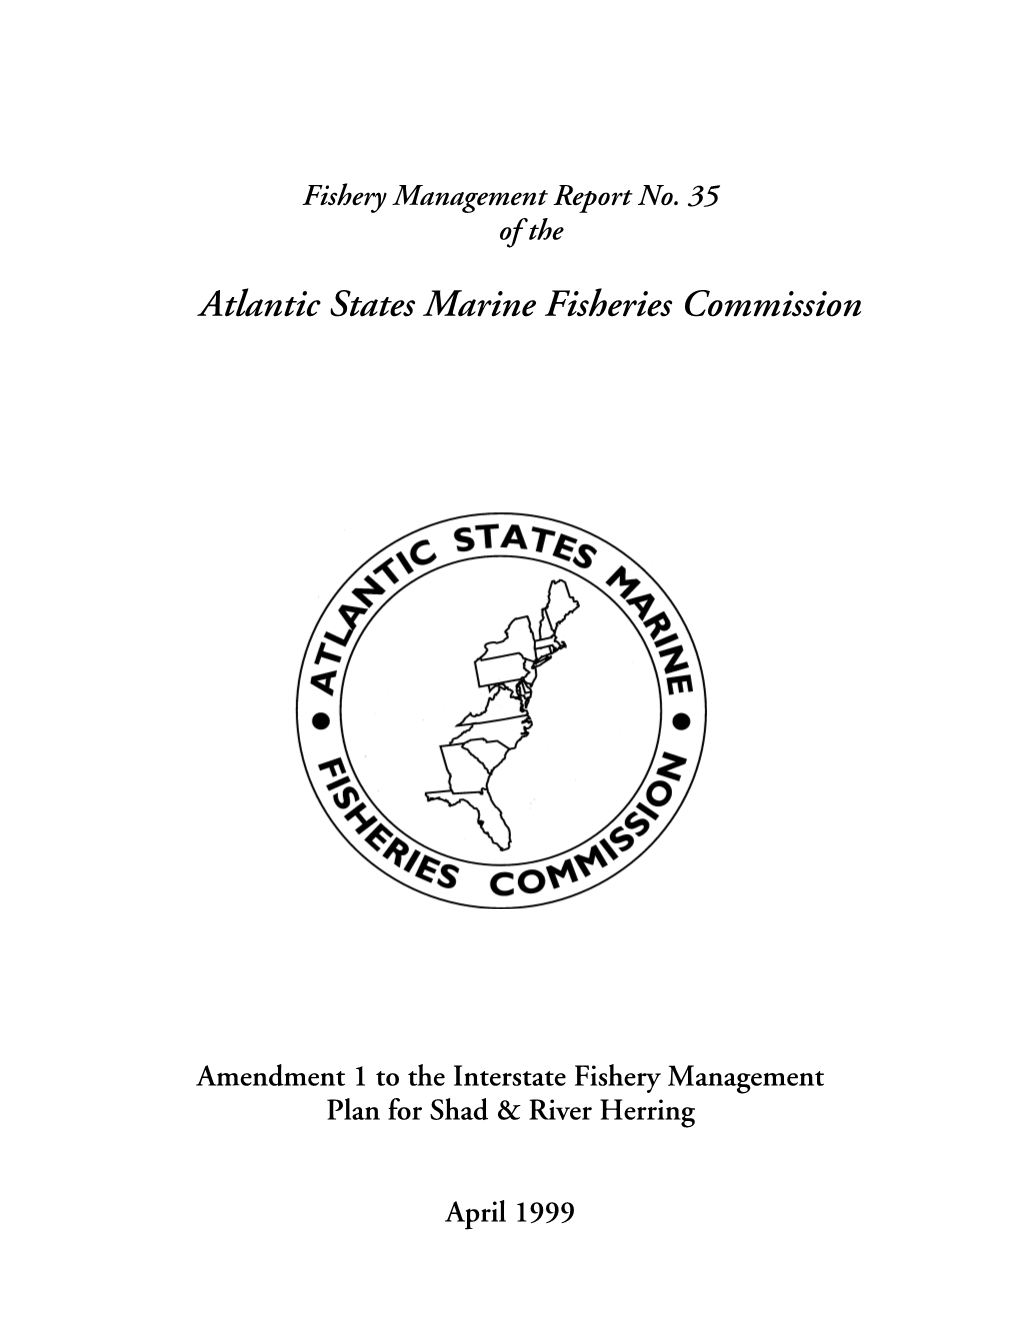 Amendment 1 to the Interstate Fishery Management Plan for Shad & River Herring